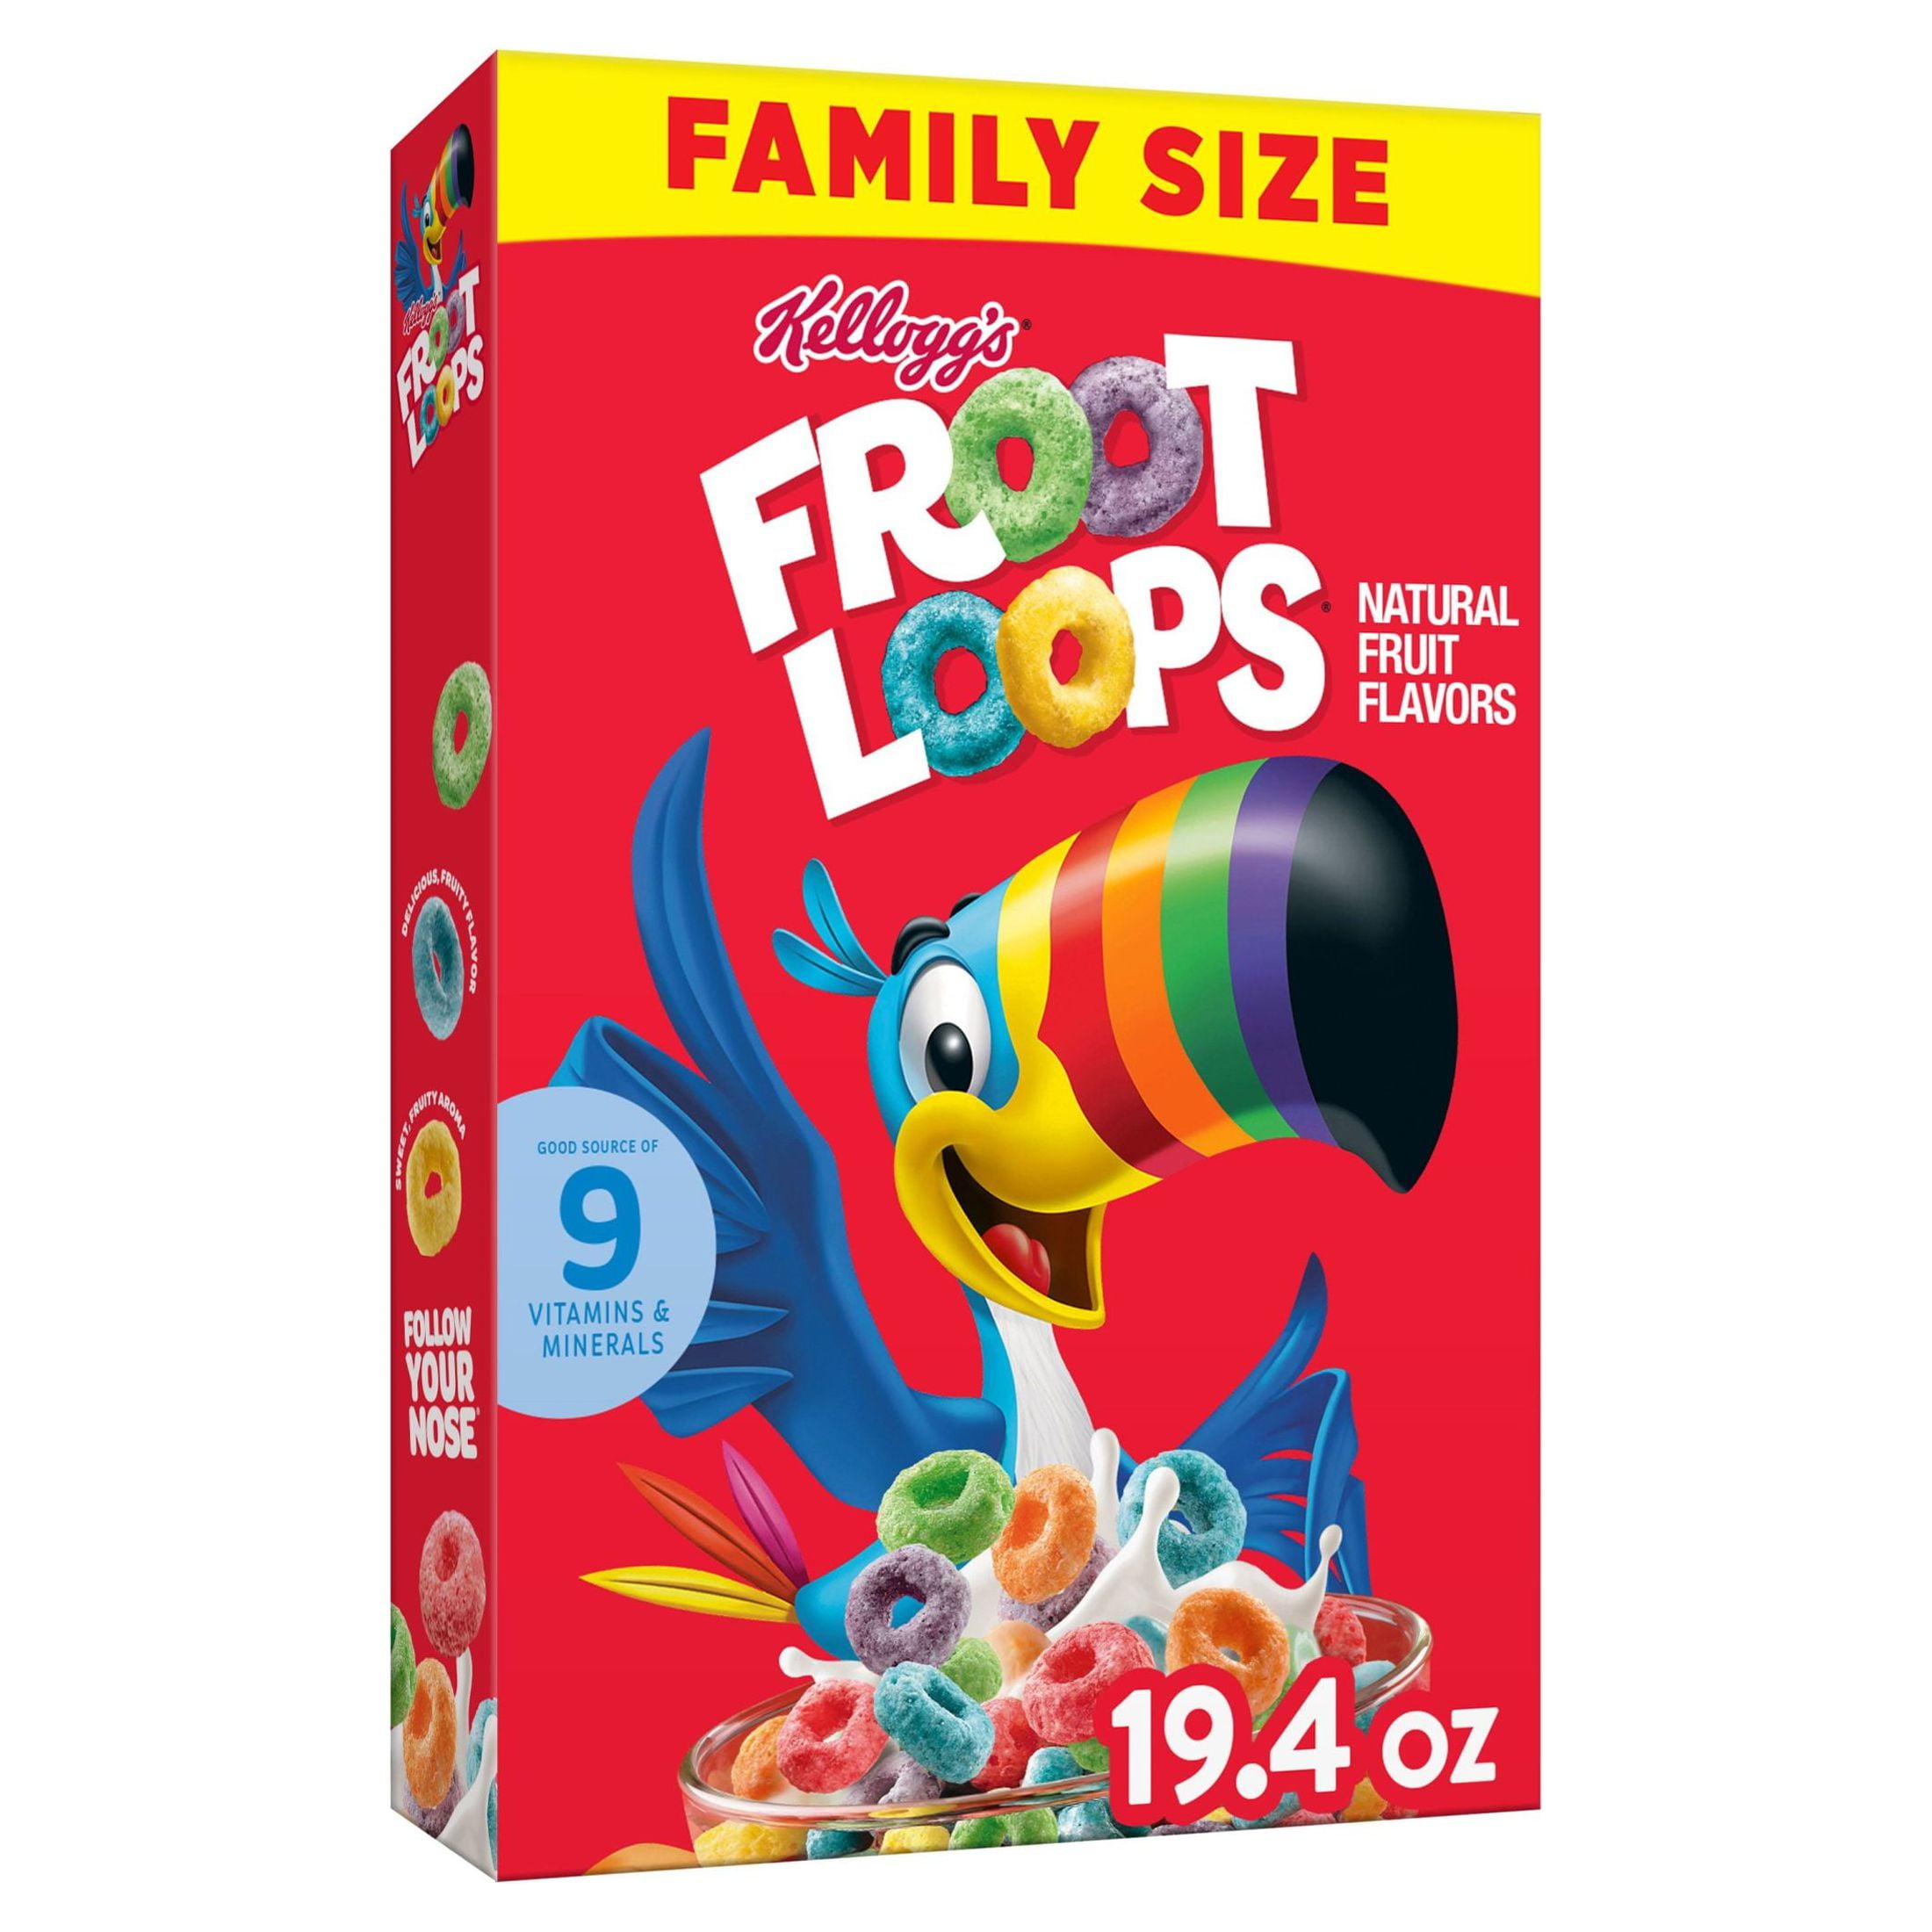 Kellogg's Froot Loops Original Cold Breakfast Cereal, Family Size, 19.4 oz  Box